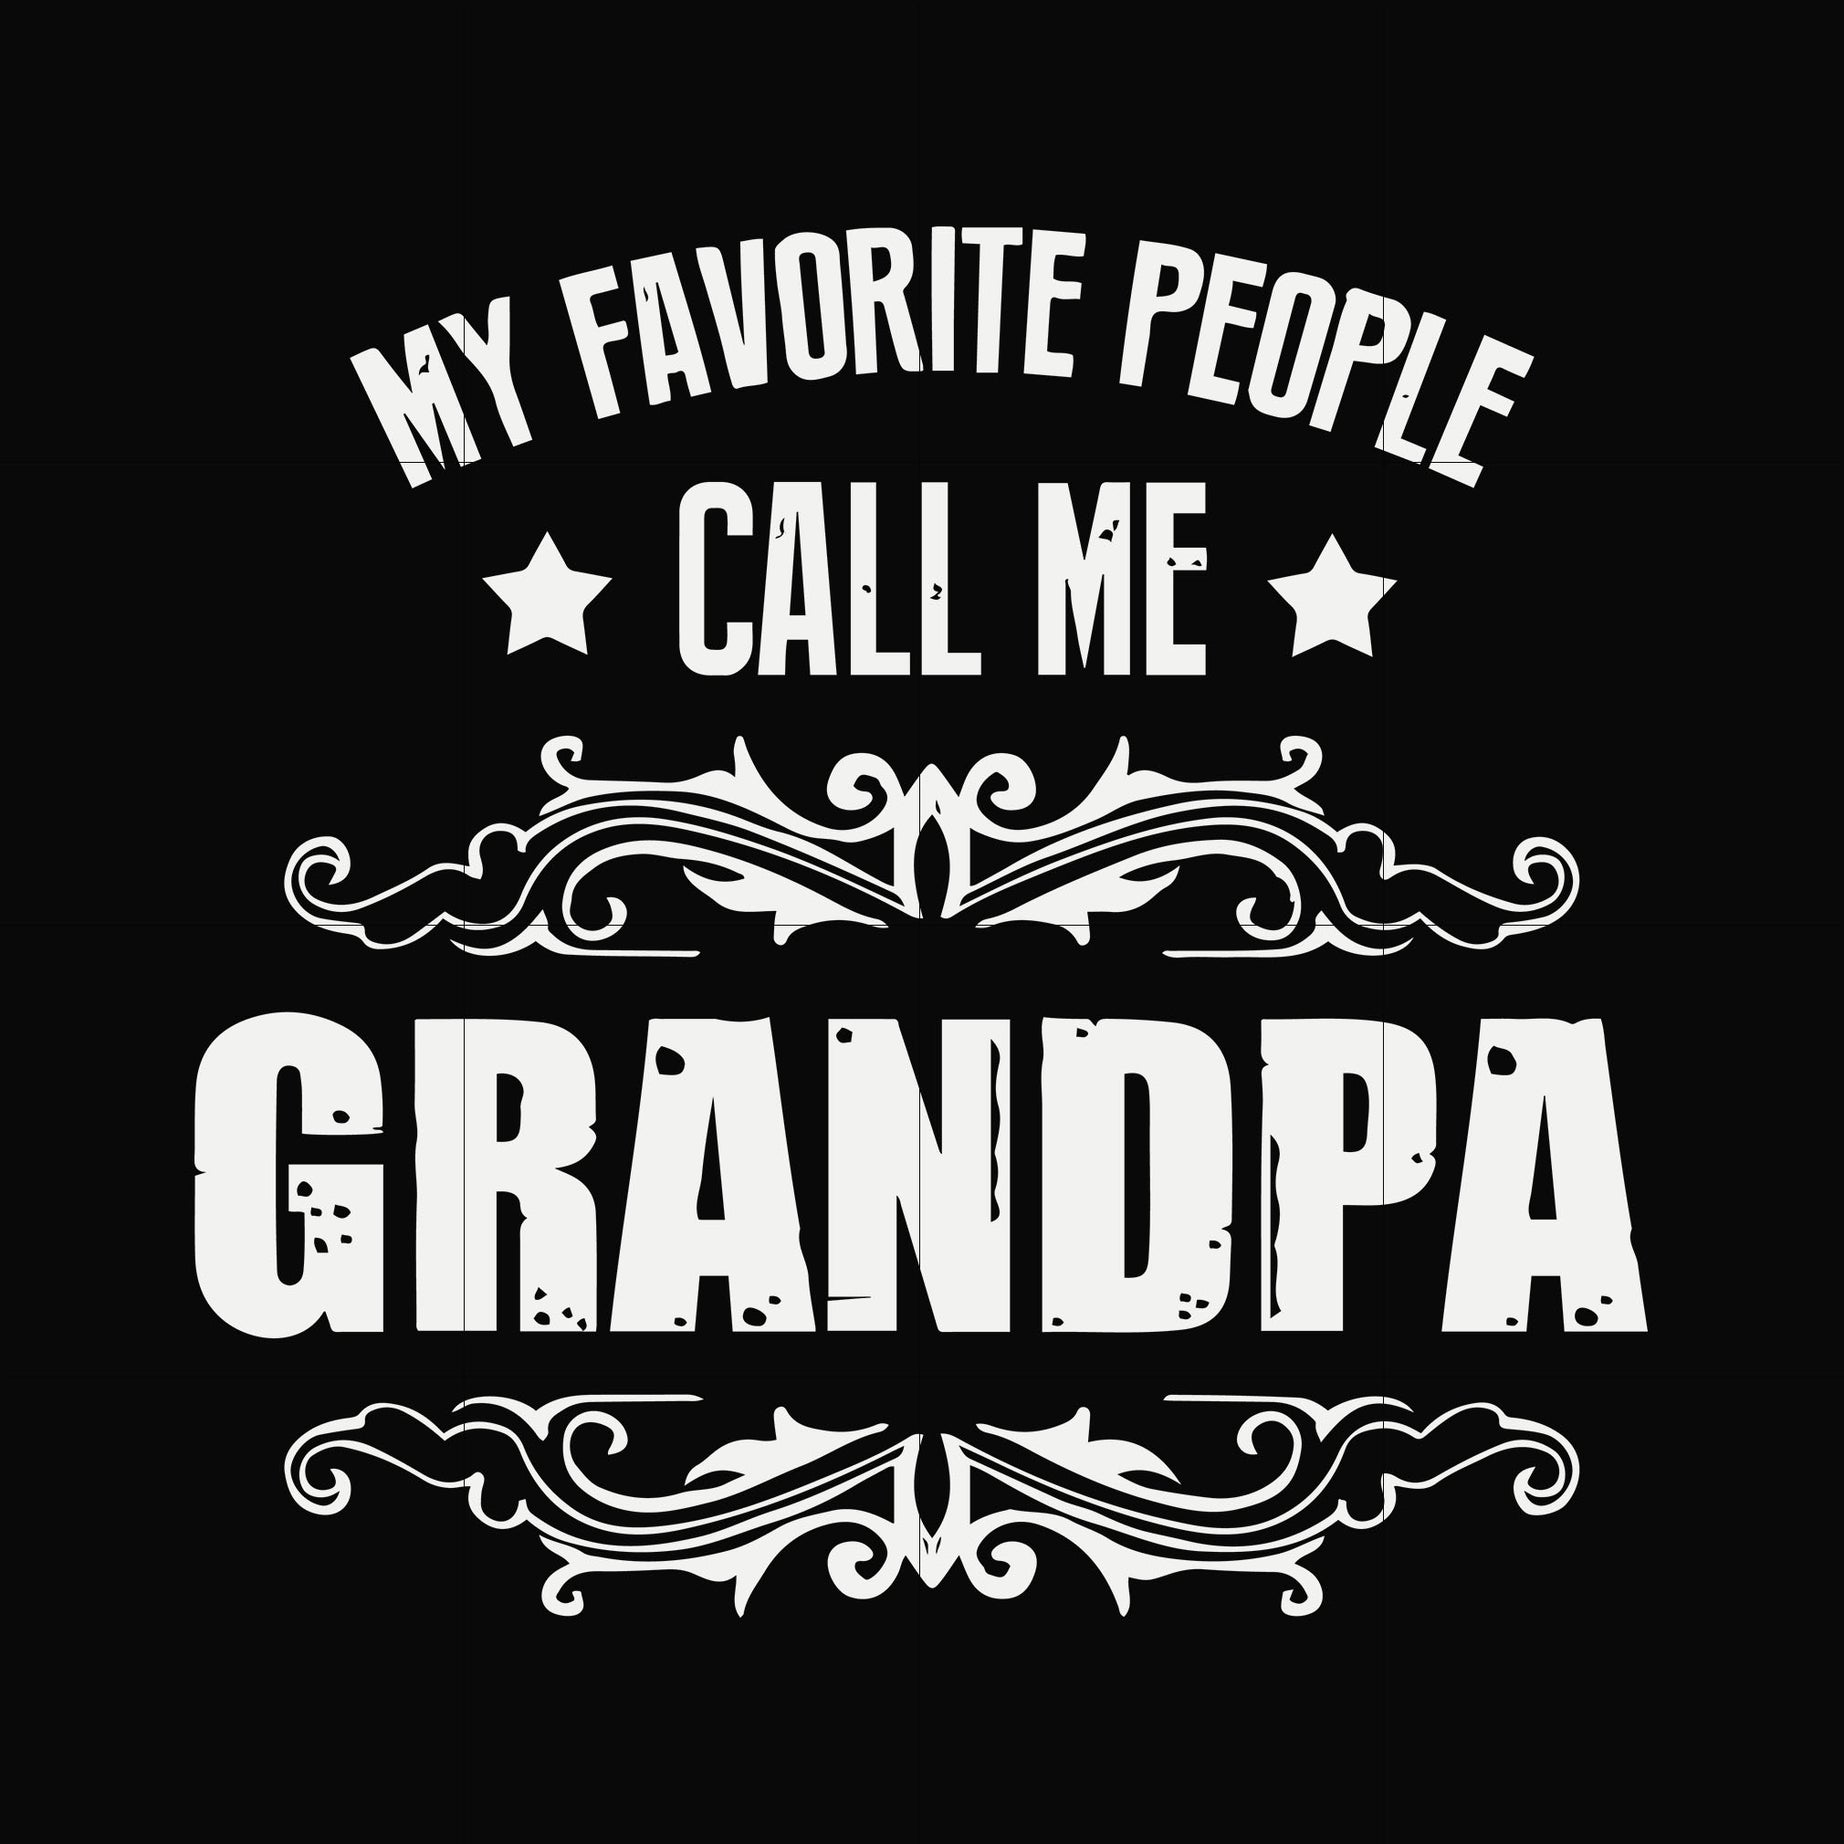 My favorite people call me grandpa svg, png, dxf, eps file FN000829